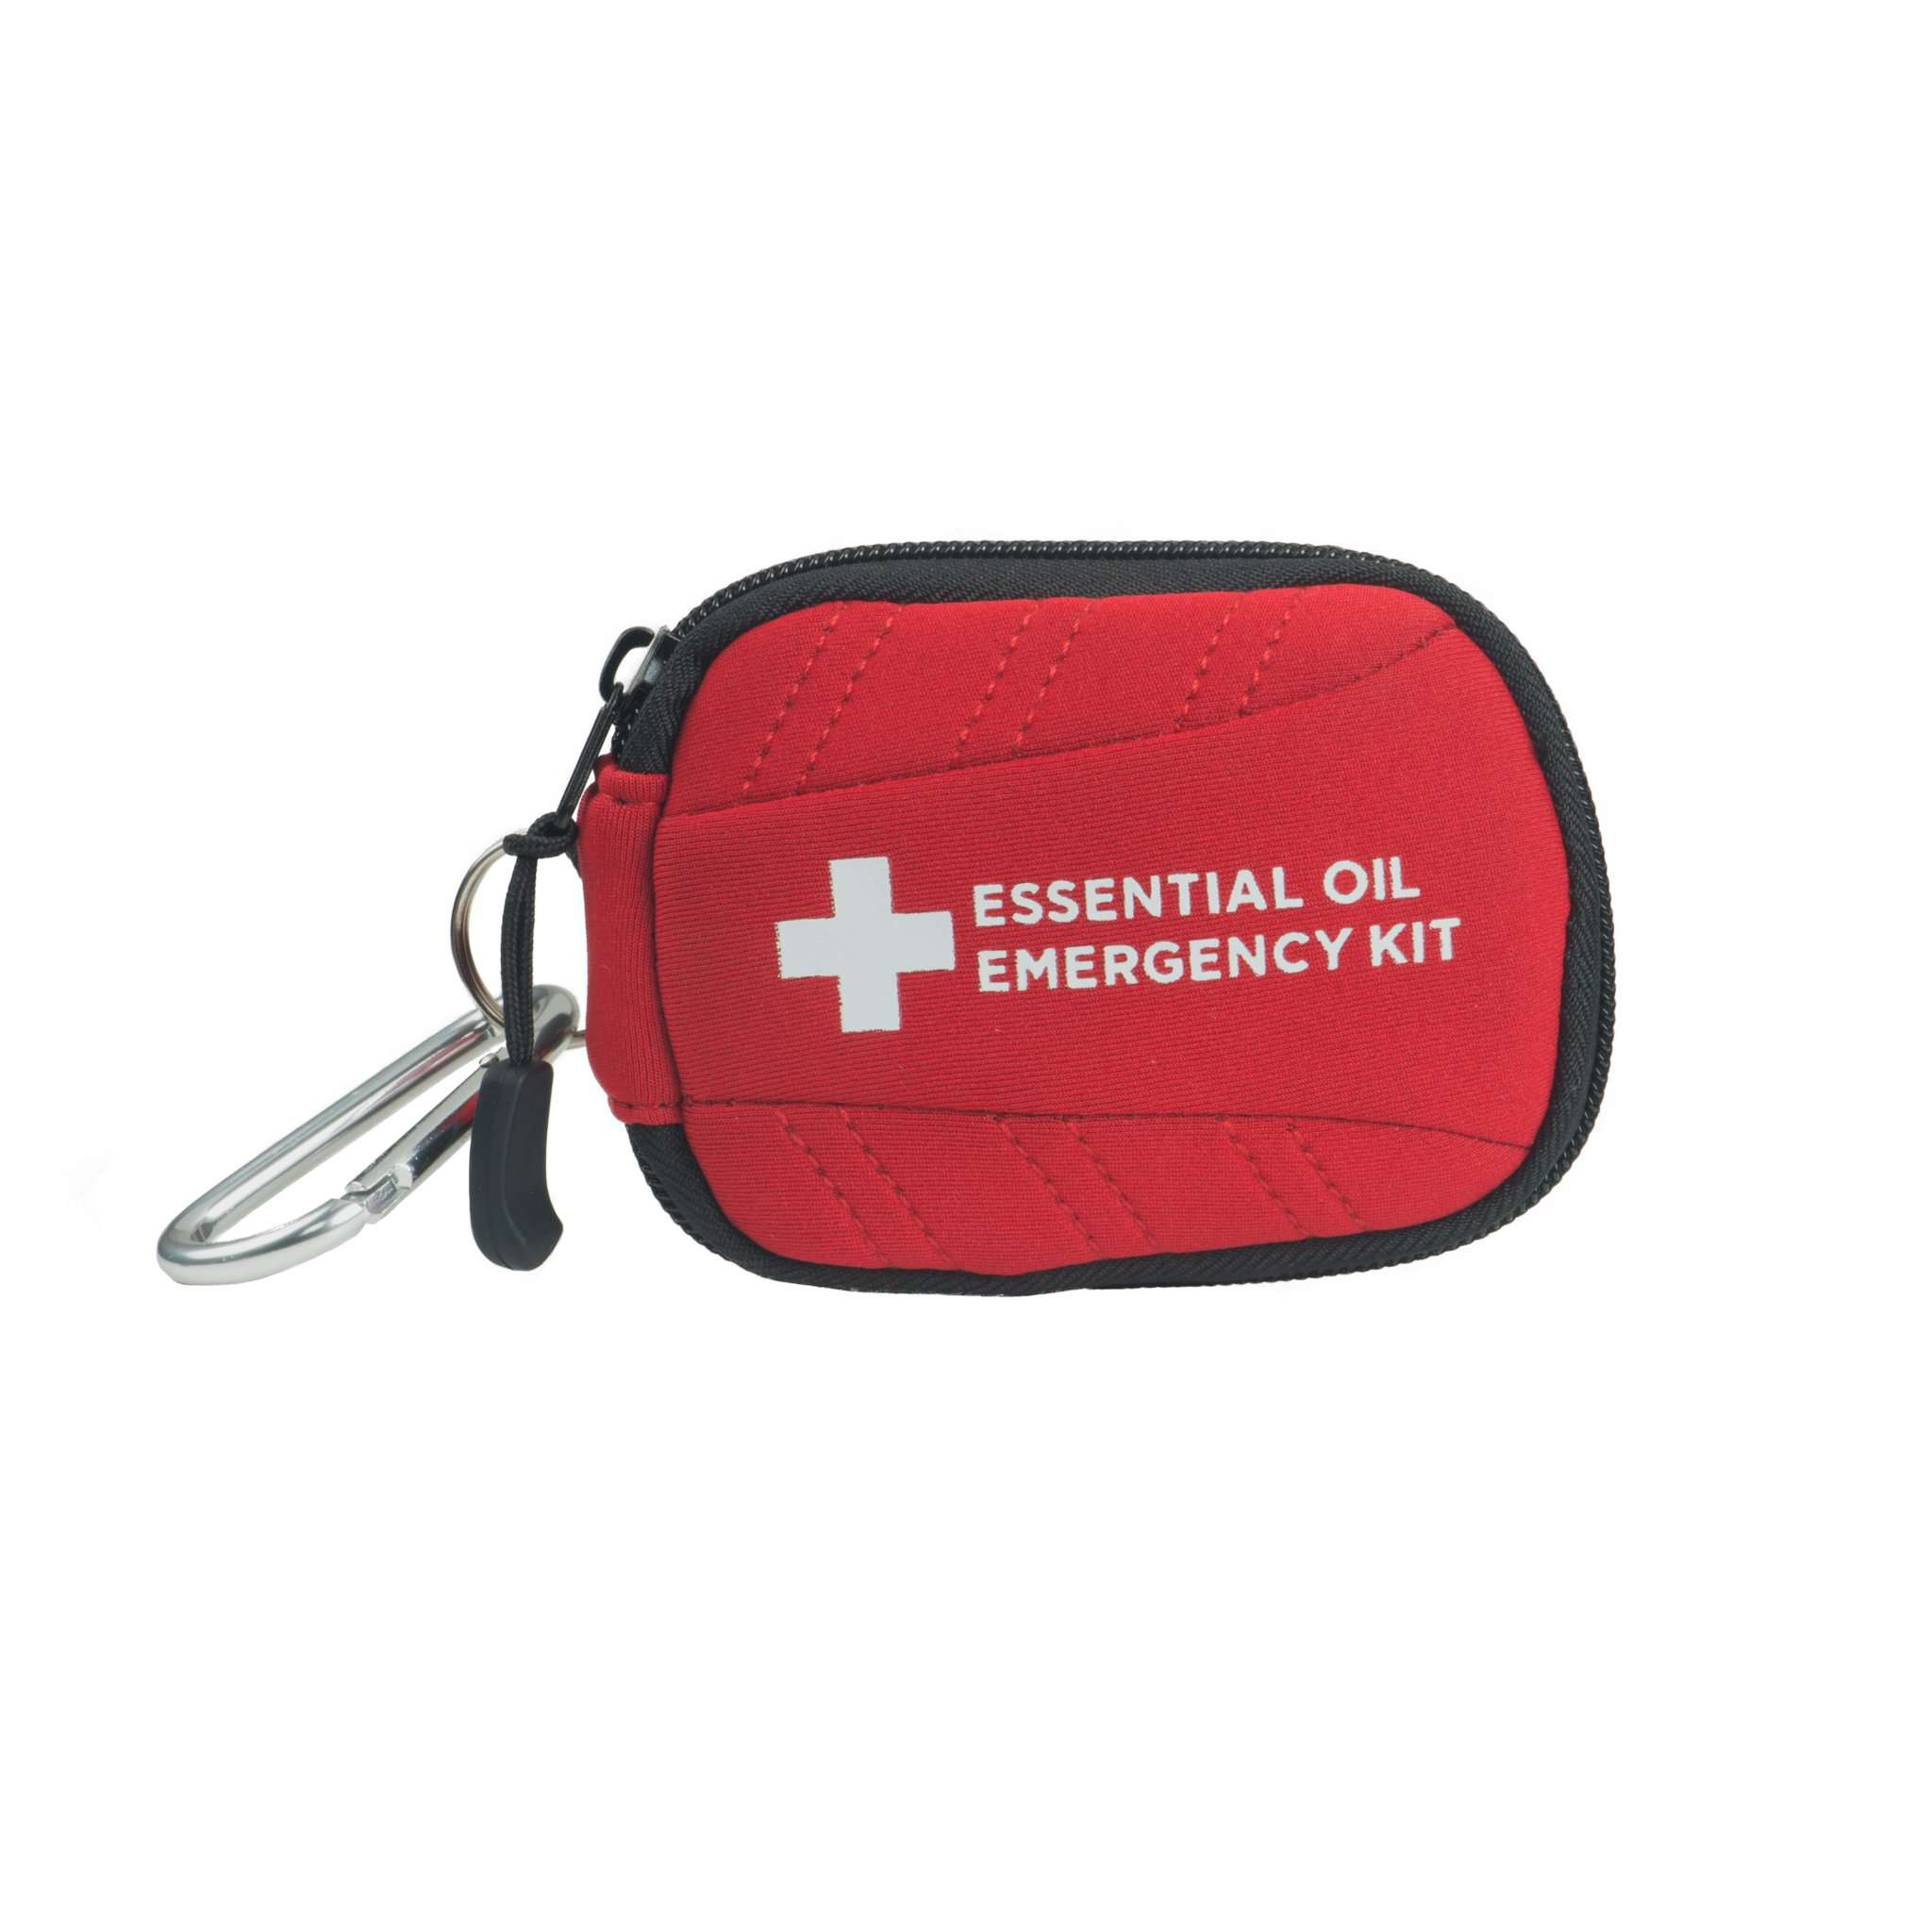 Essential Oil Emergency Kit Travel Case - Your Oil Tools